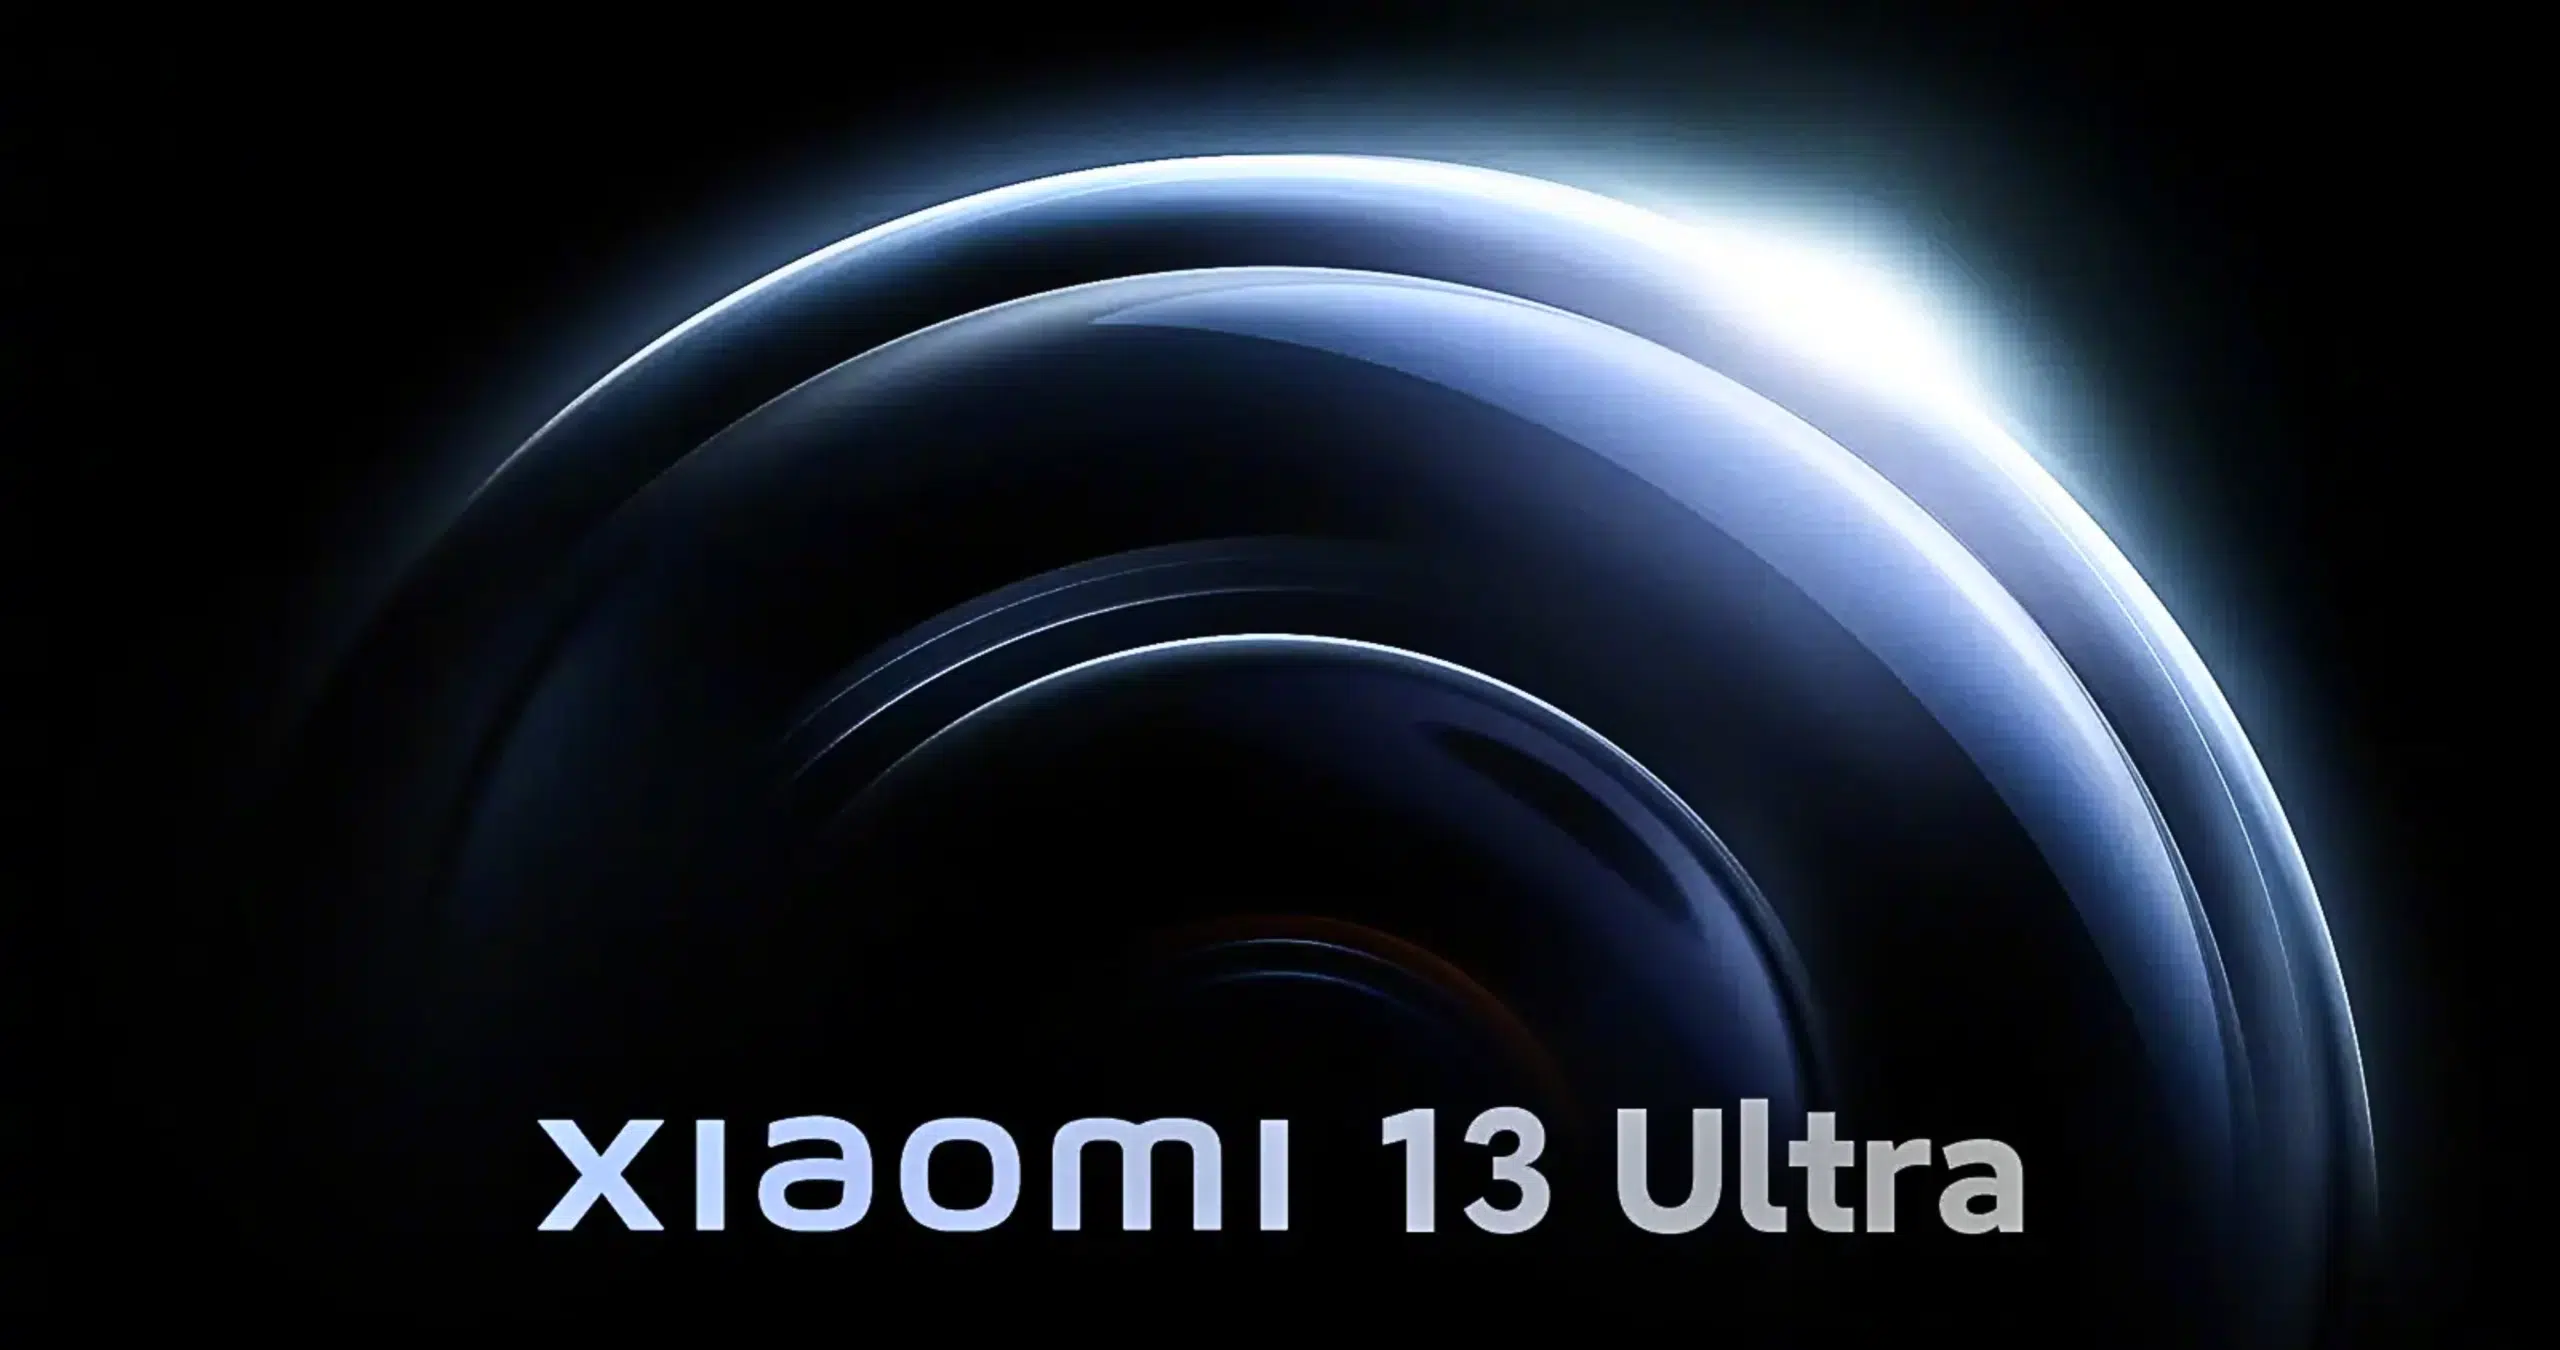 Xiaomi 13 Ultra Global launch date officially confirmed